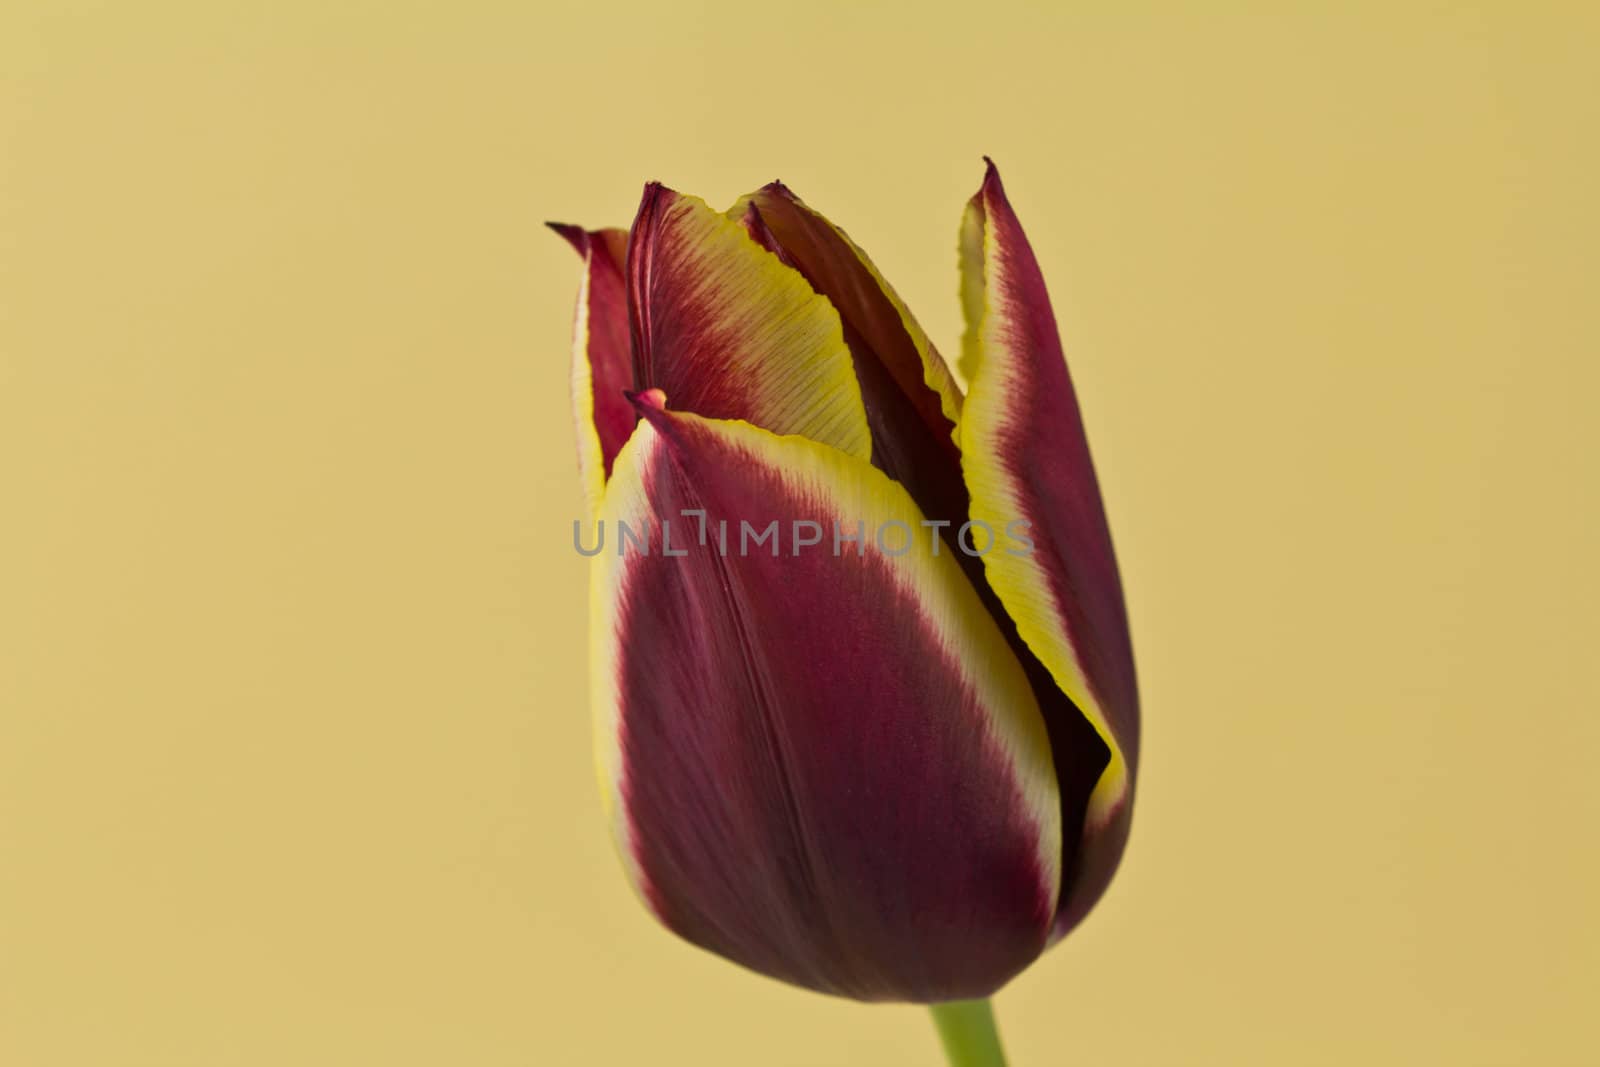 A Single Tulip on a yellow background